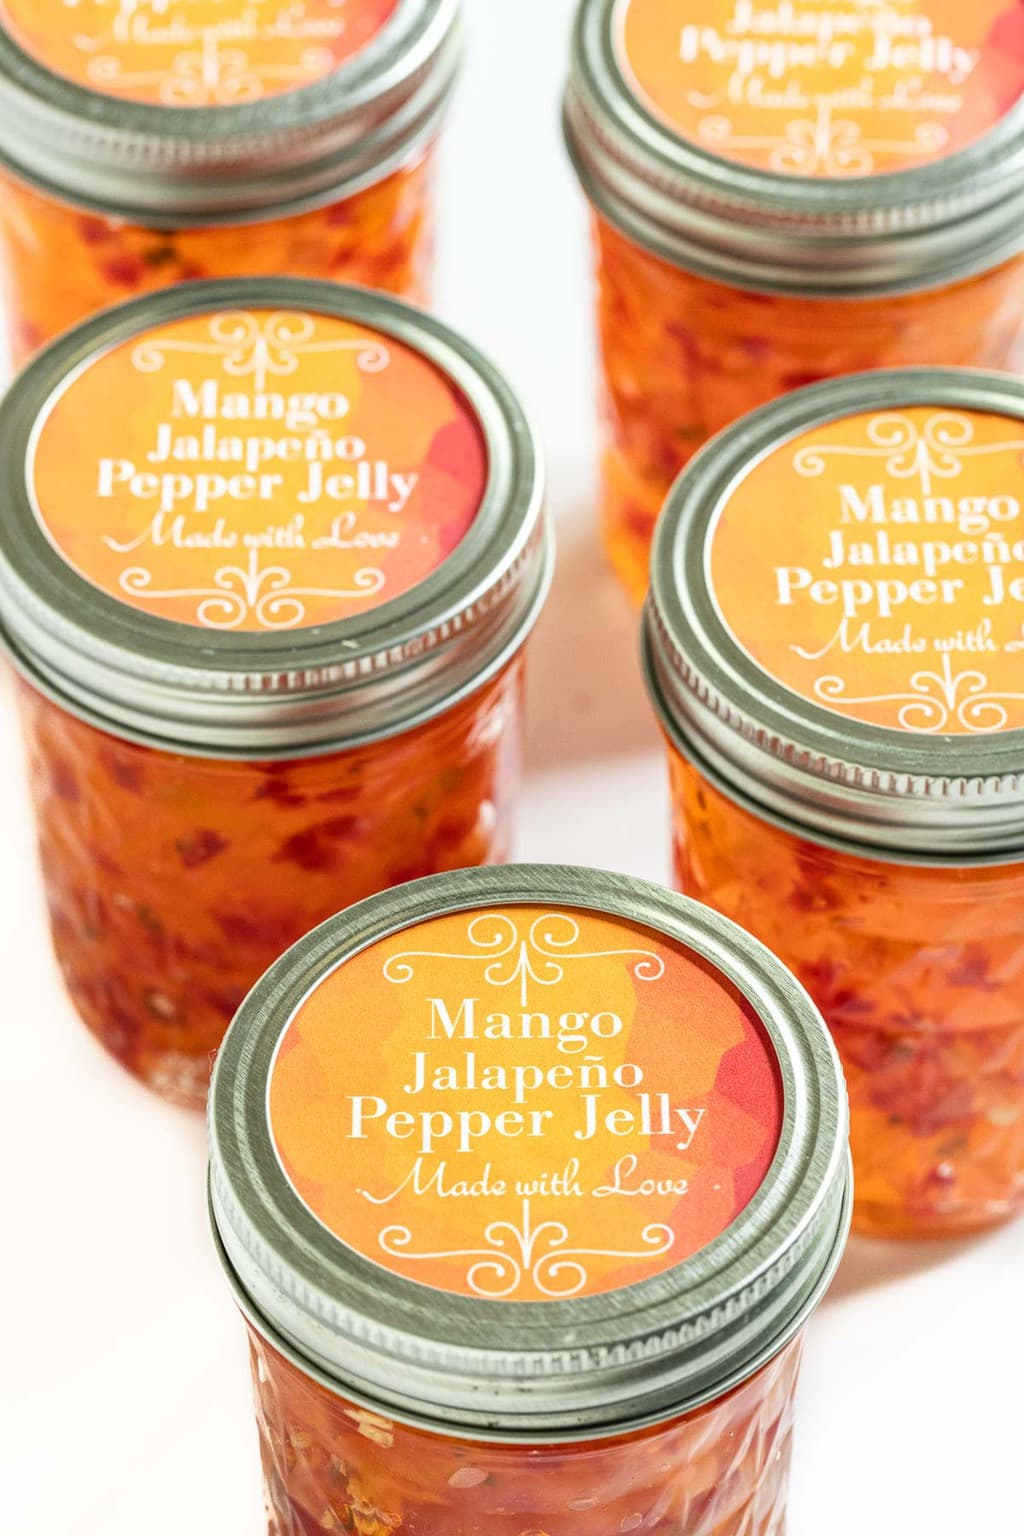 Vertical photo of jars of Mango Jalapeño Pepper Jelly with printed labels on the top of each jar identifying them as "Mango Jalapeño Pepper Jelly.